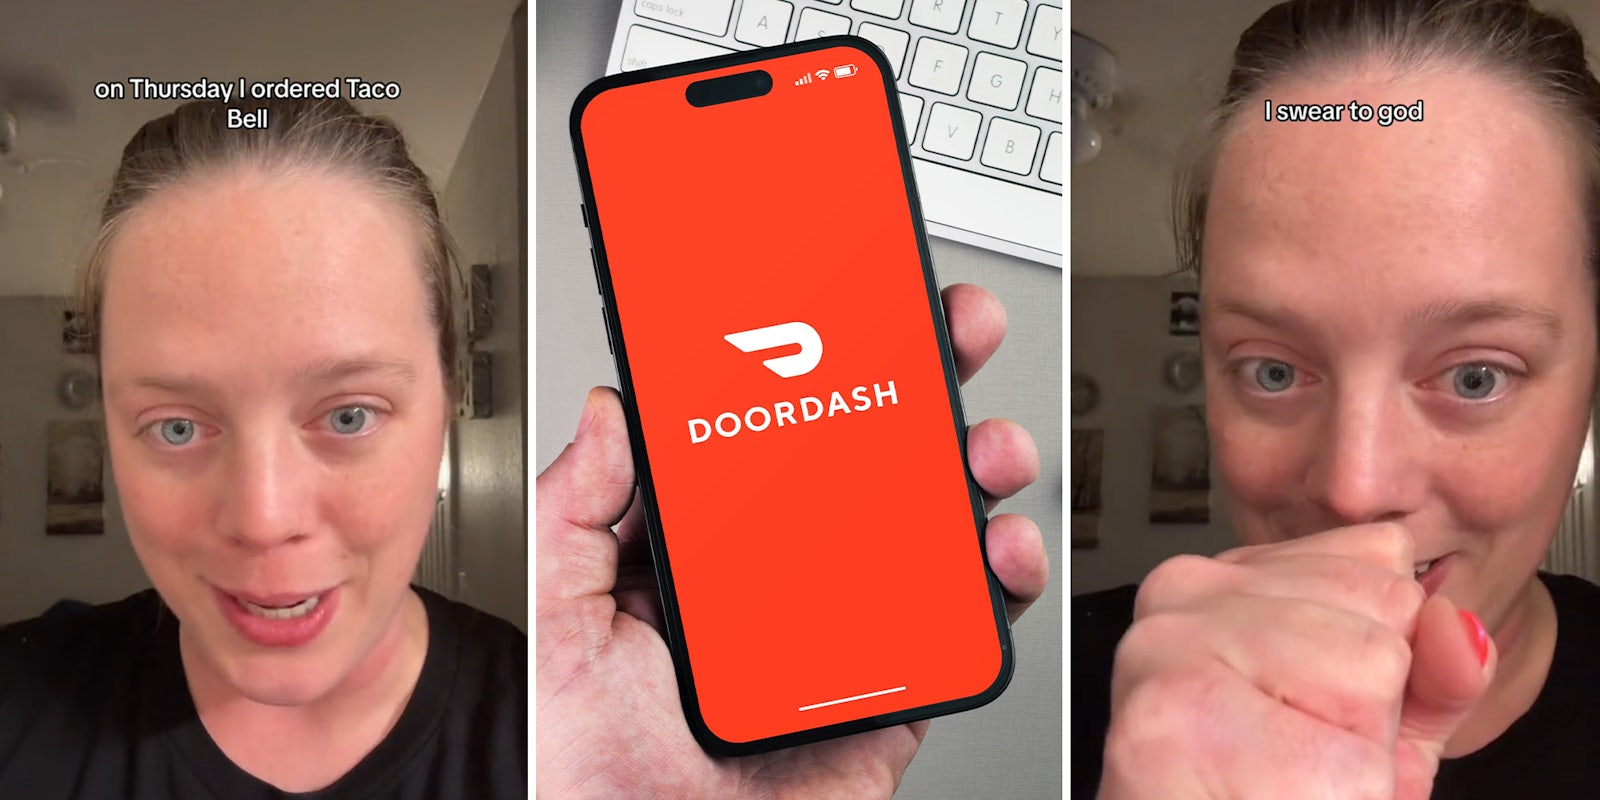 DoorDash denies customer refund after she repeatedly did not receive her drink